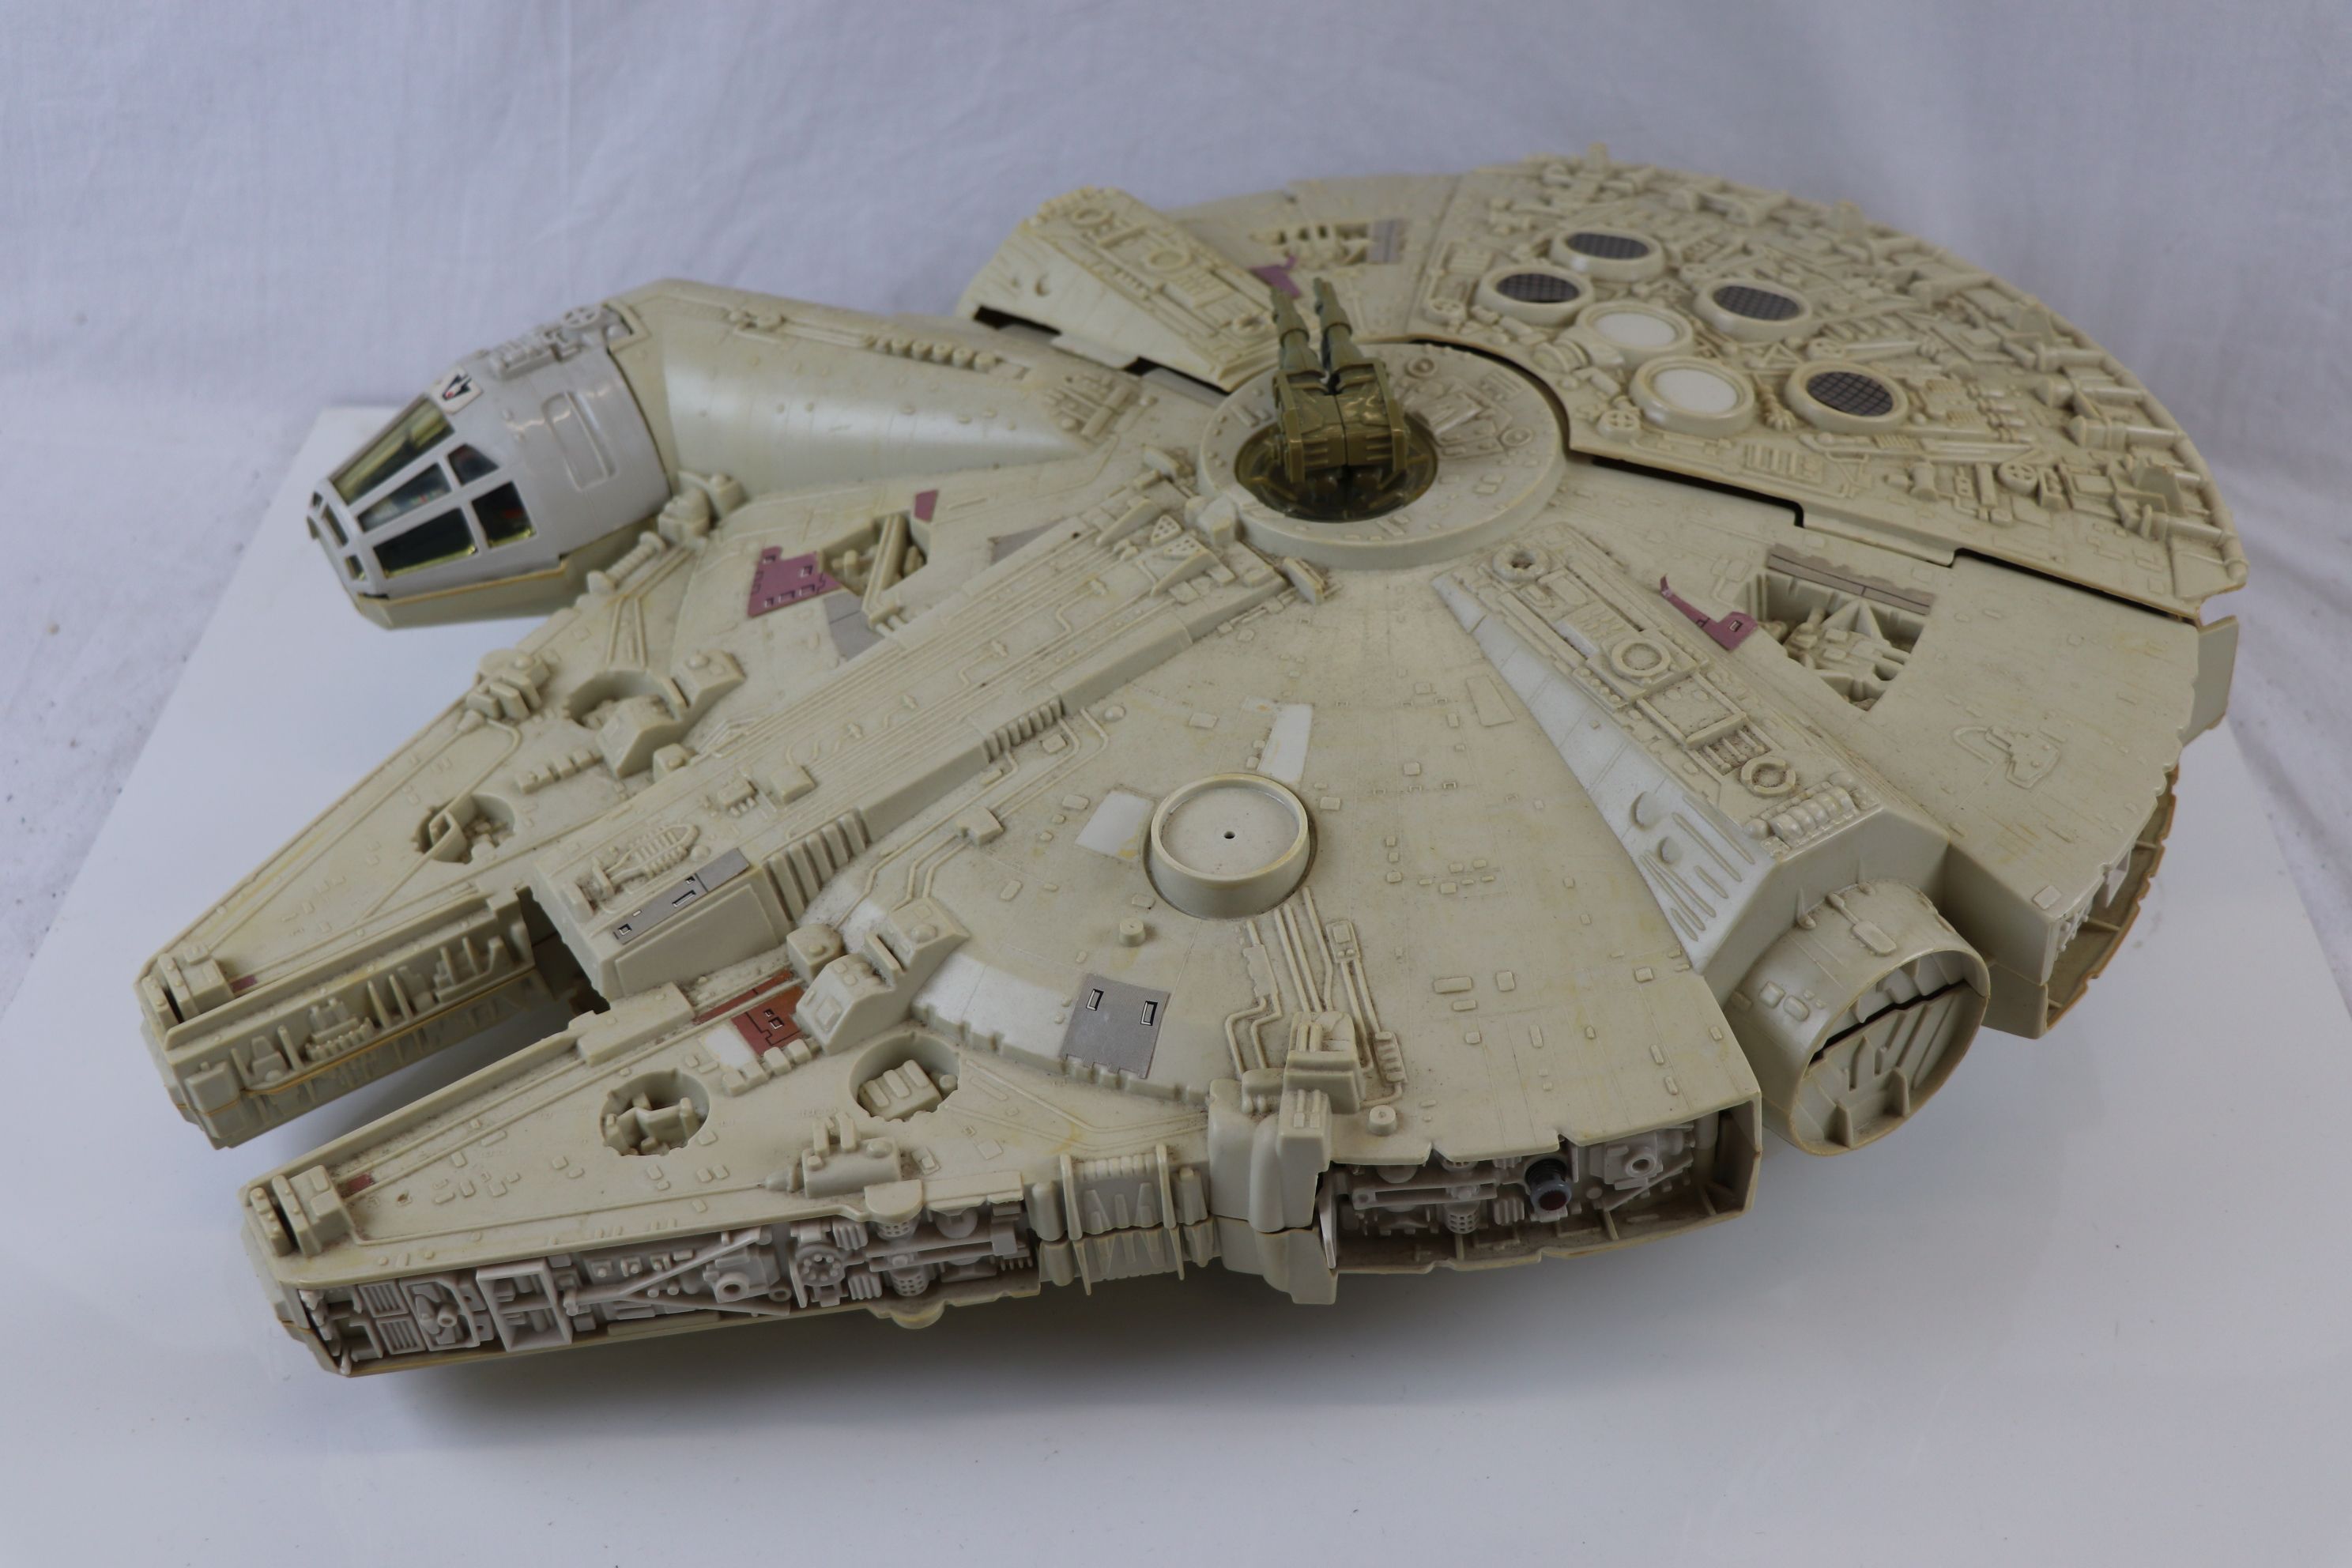 Star Wars - Original boxed Palitoy The Empire Strikes Back Millennium Falcon Spaceship in gd play - Image 3 of 5